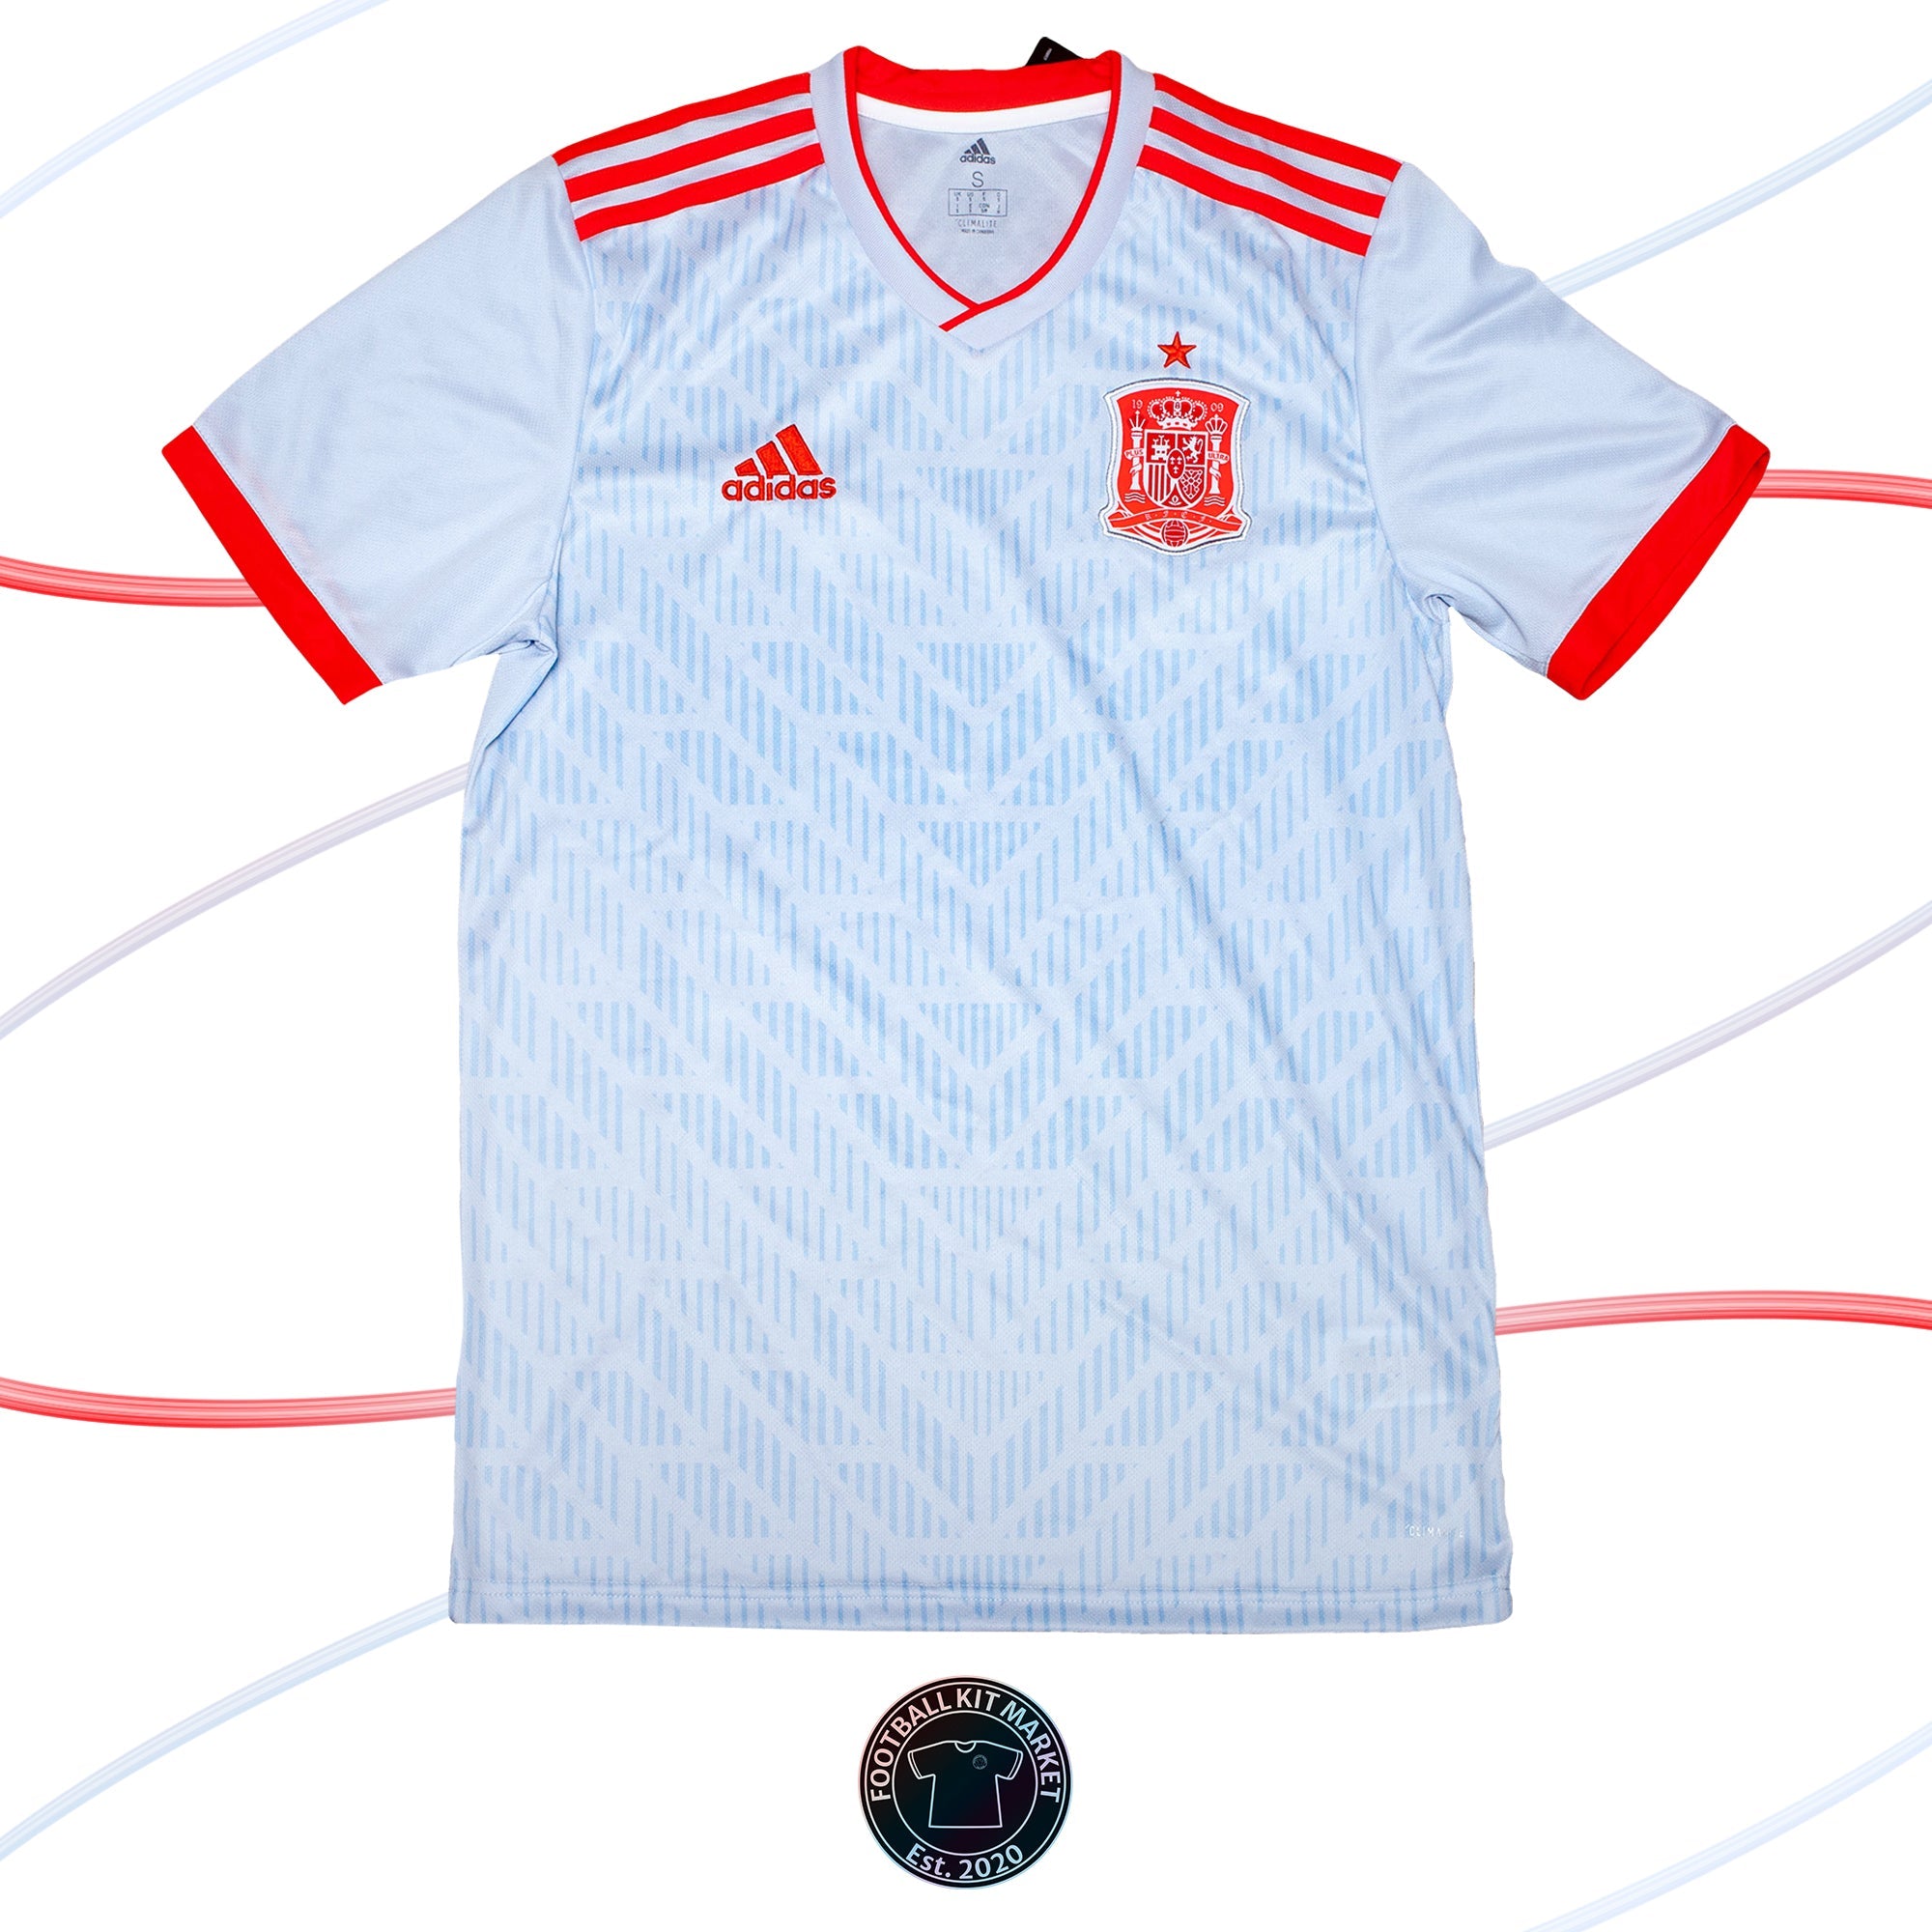 Genuine SPAIN Away Shirt (2018-2019) - ADIDAS (S) - Product Image from Football Kit Market